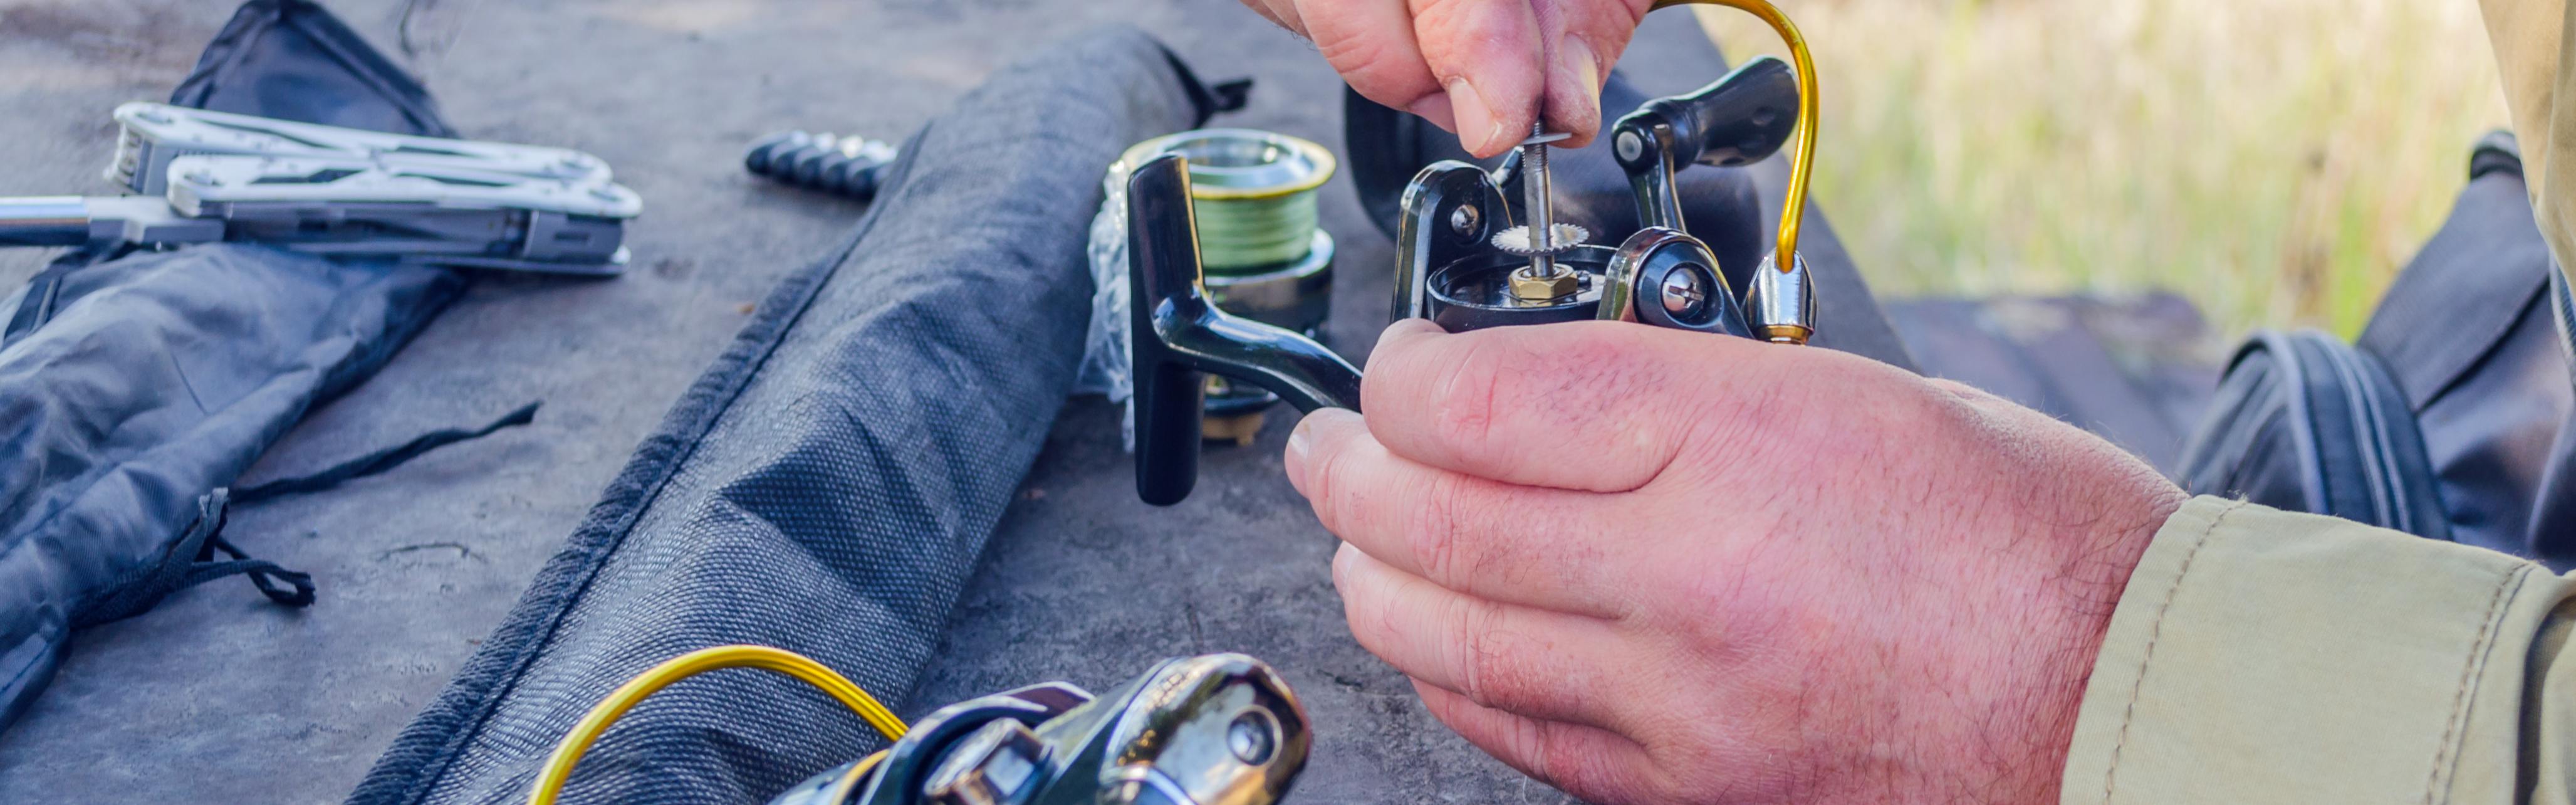 How to Put Fishing Line on a Reel: A Step-by-Step Guide